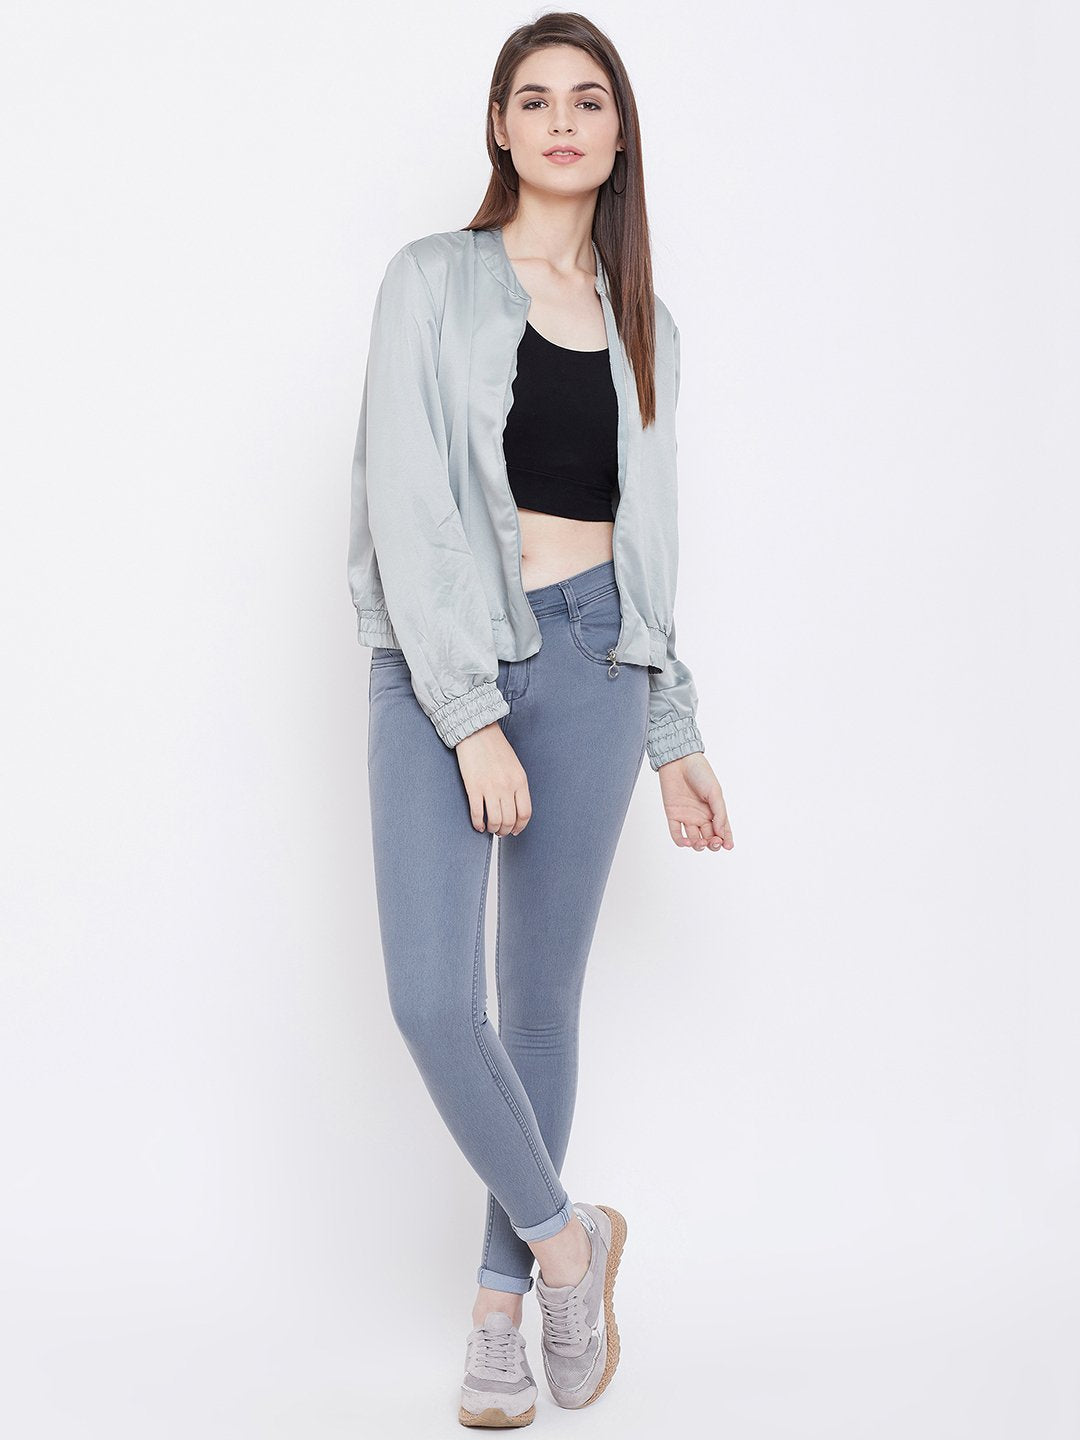 Slim Fit Stretchable Grey Jeans - NiftyJeans